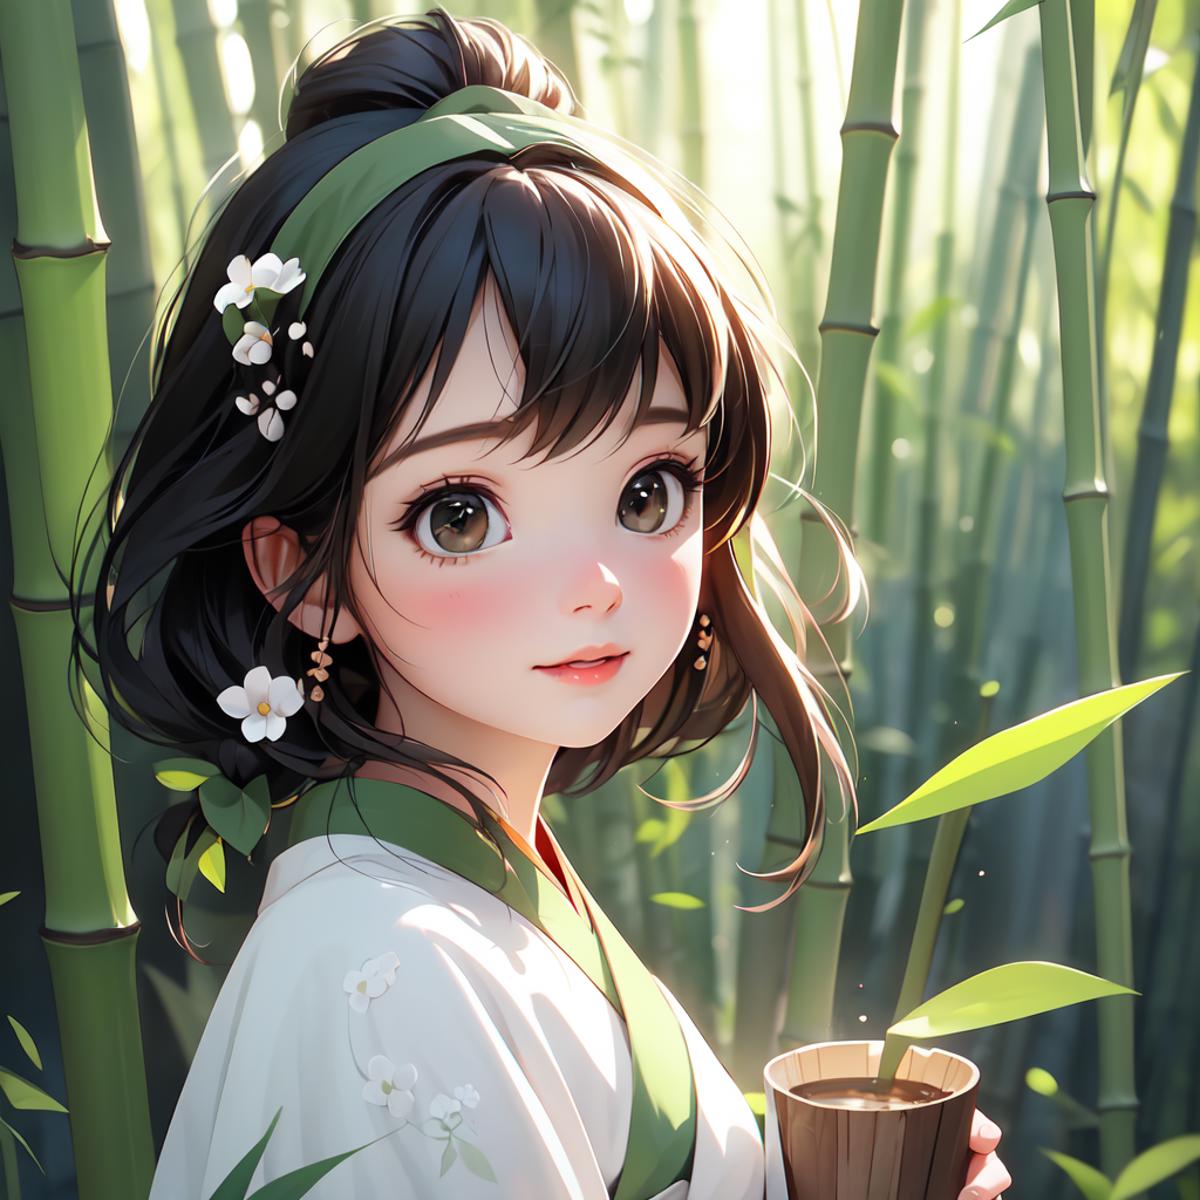 Cute girl in the bamboo forest image by ZIJINcreativity